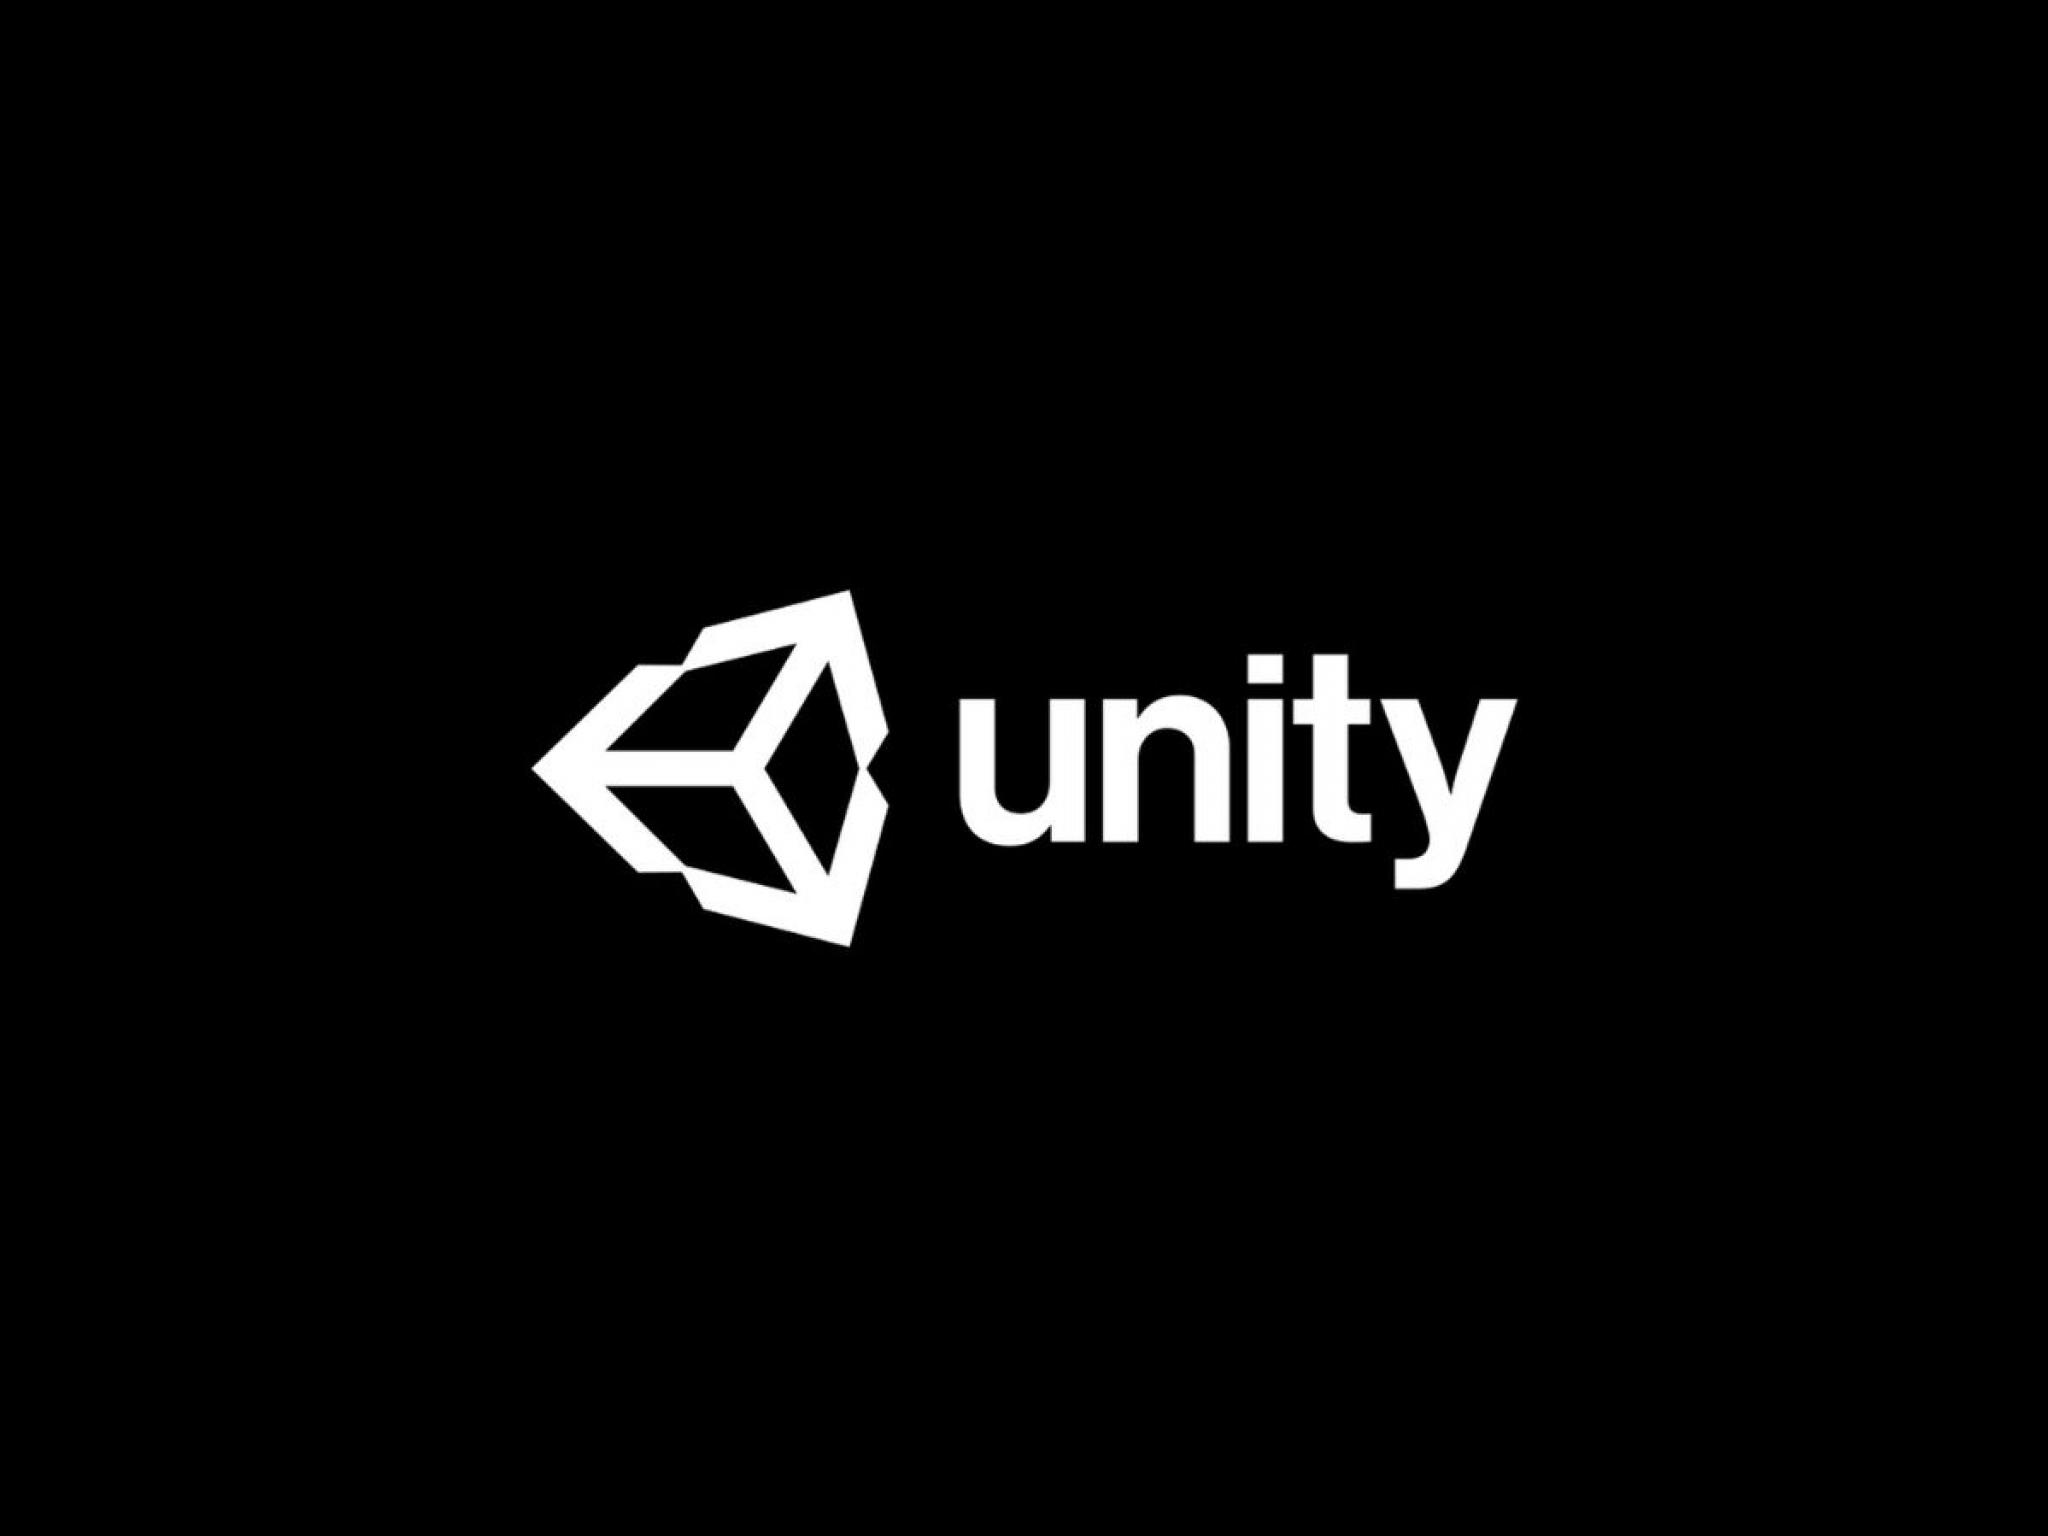  unity-software-posts-q4-loss-joins-cargurus-intuitive-machines-and-other-big-stocks-moving-lower-in-tuesdays-pre-market-session 